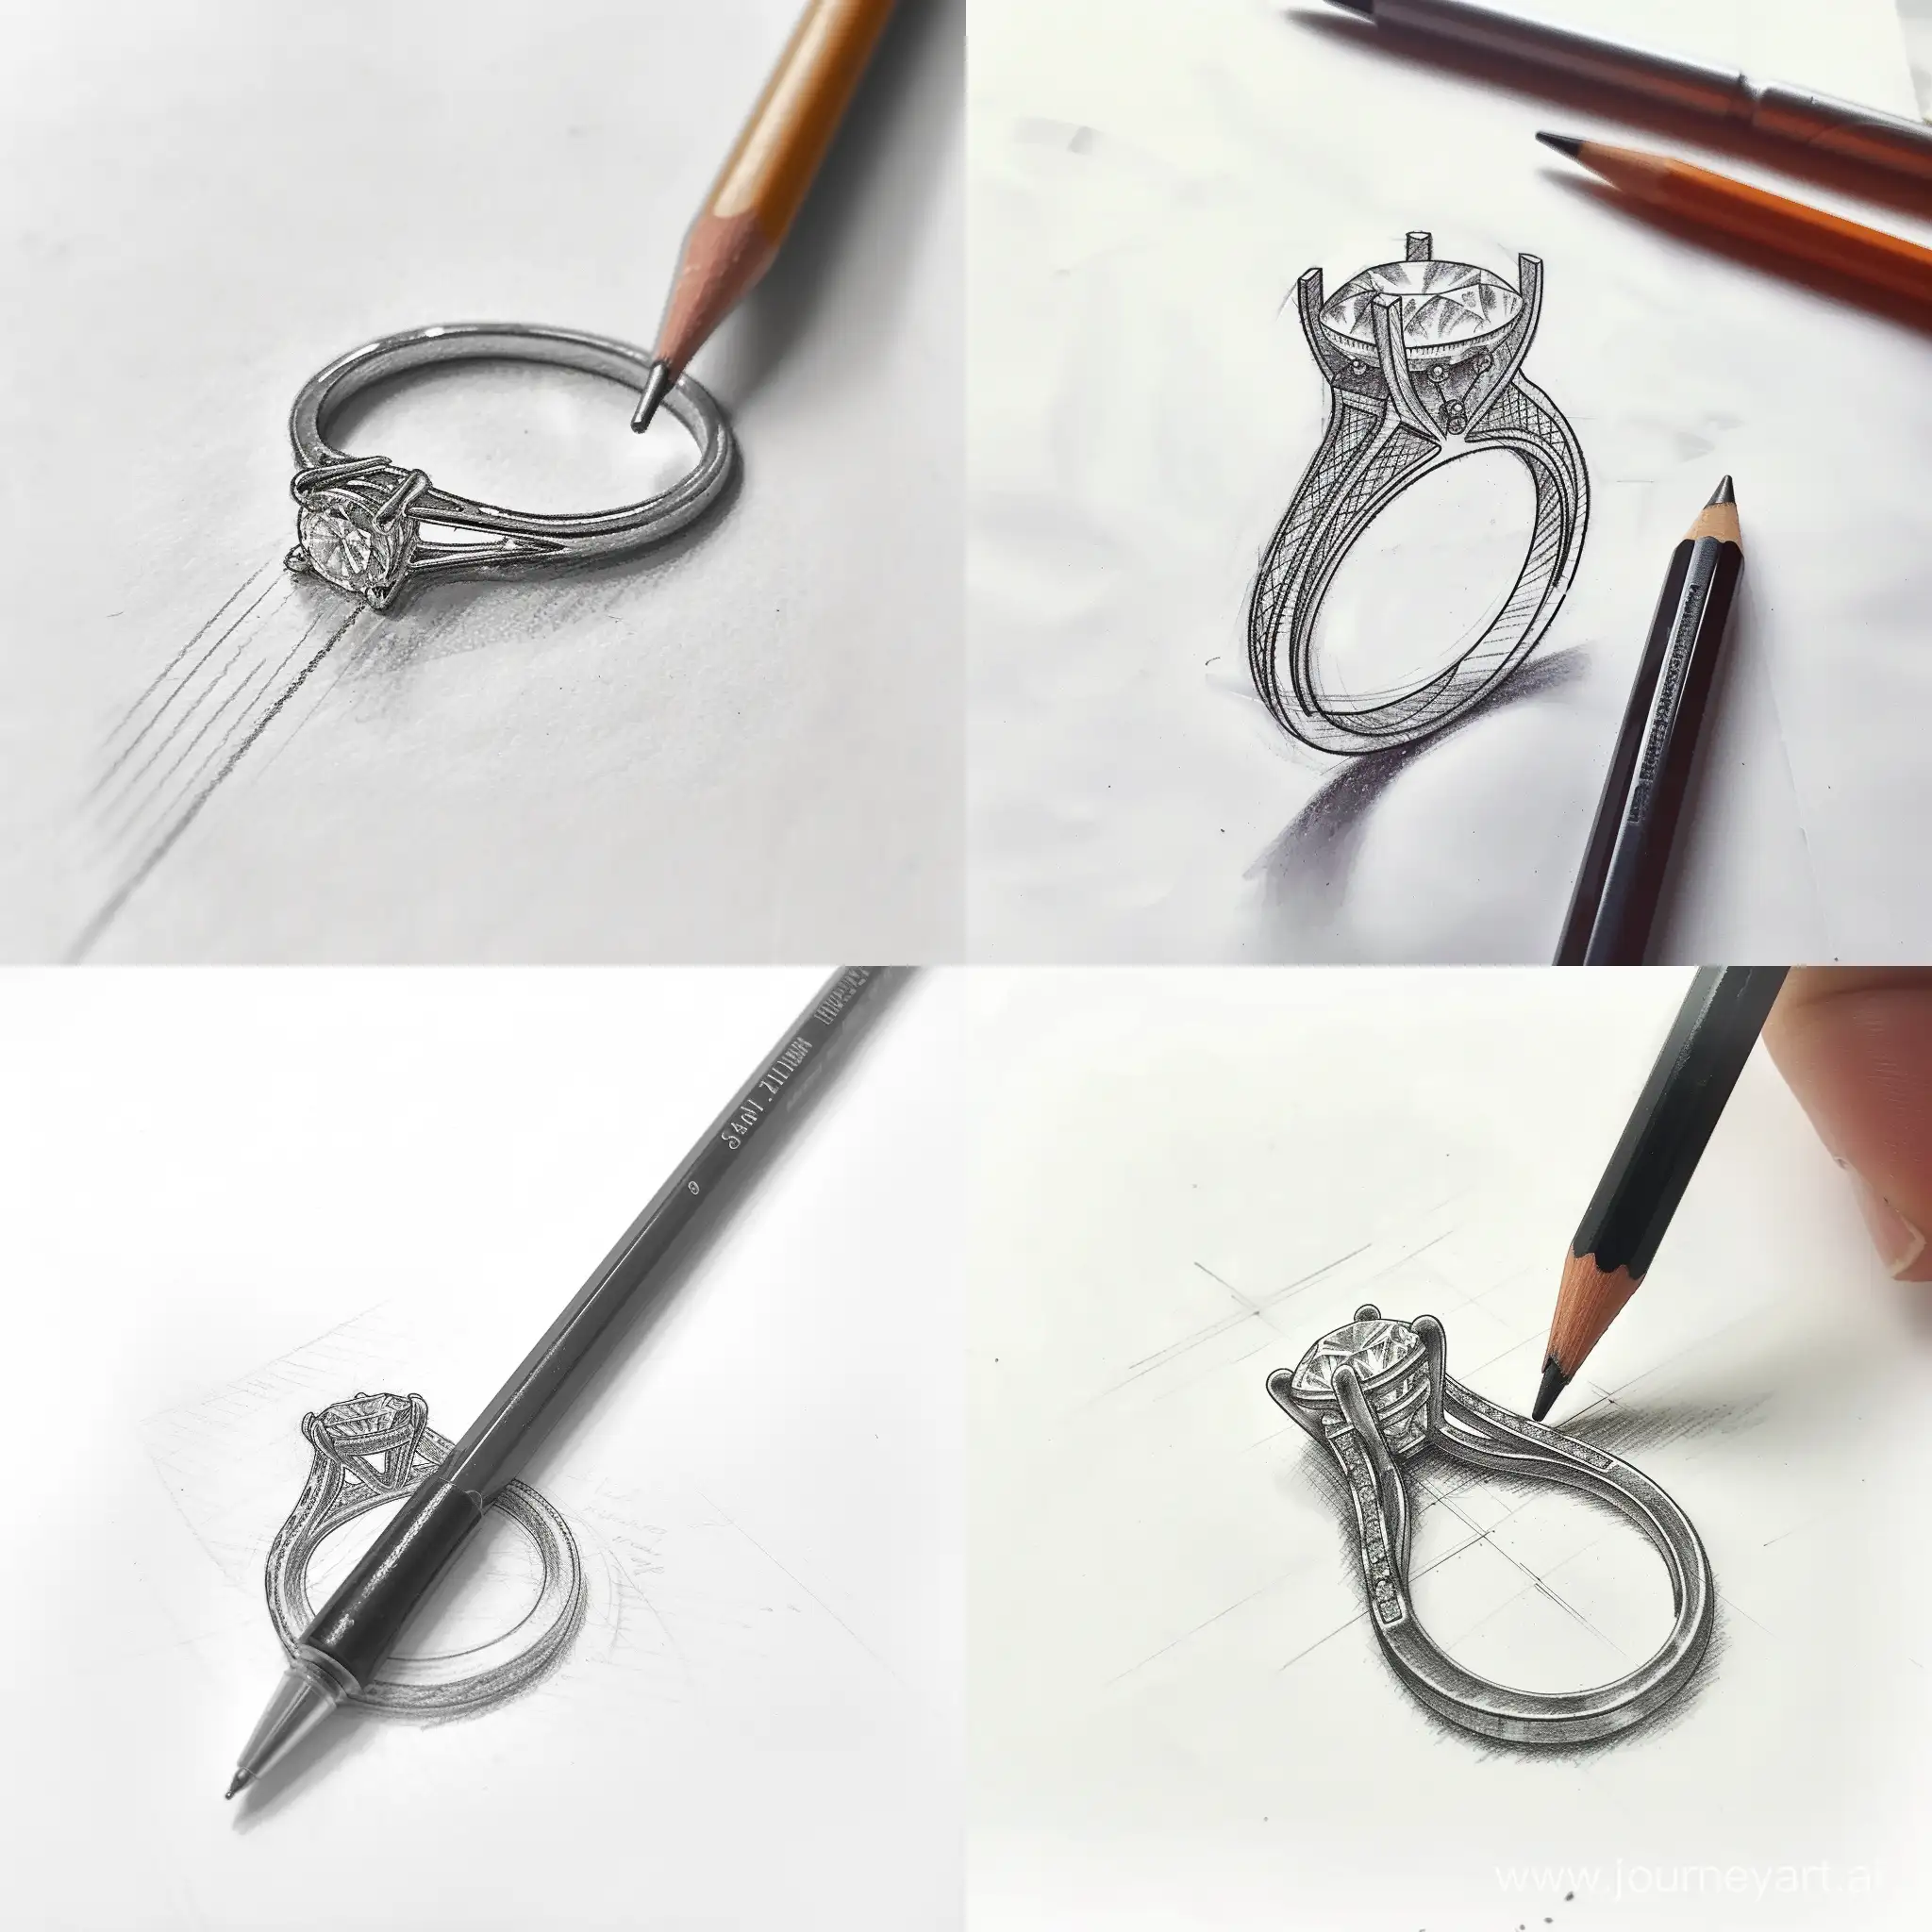 Romantic-Sketch-of-Engagement-Ring-Design-for-Girlfriend